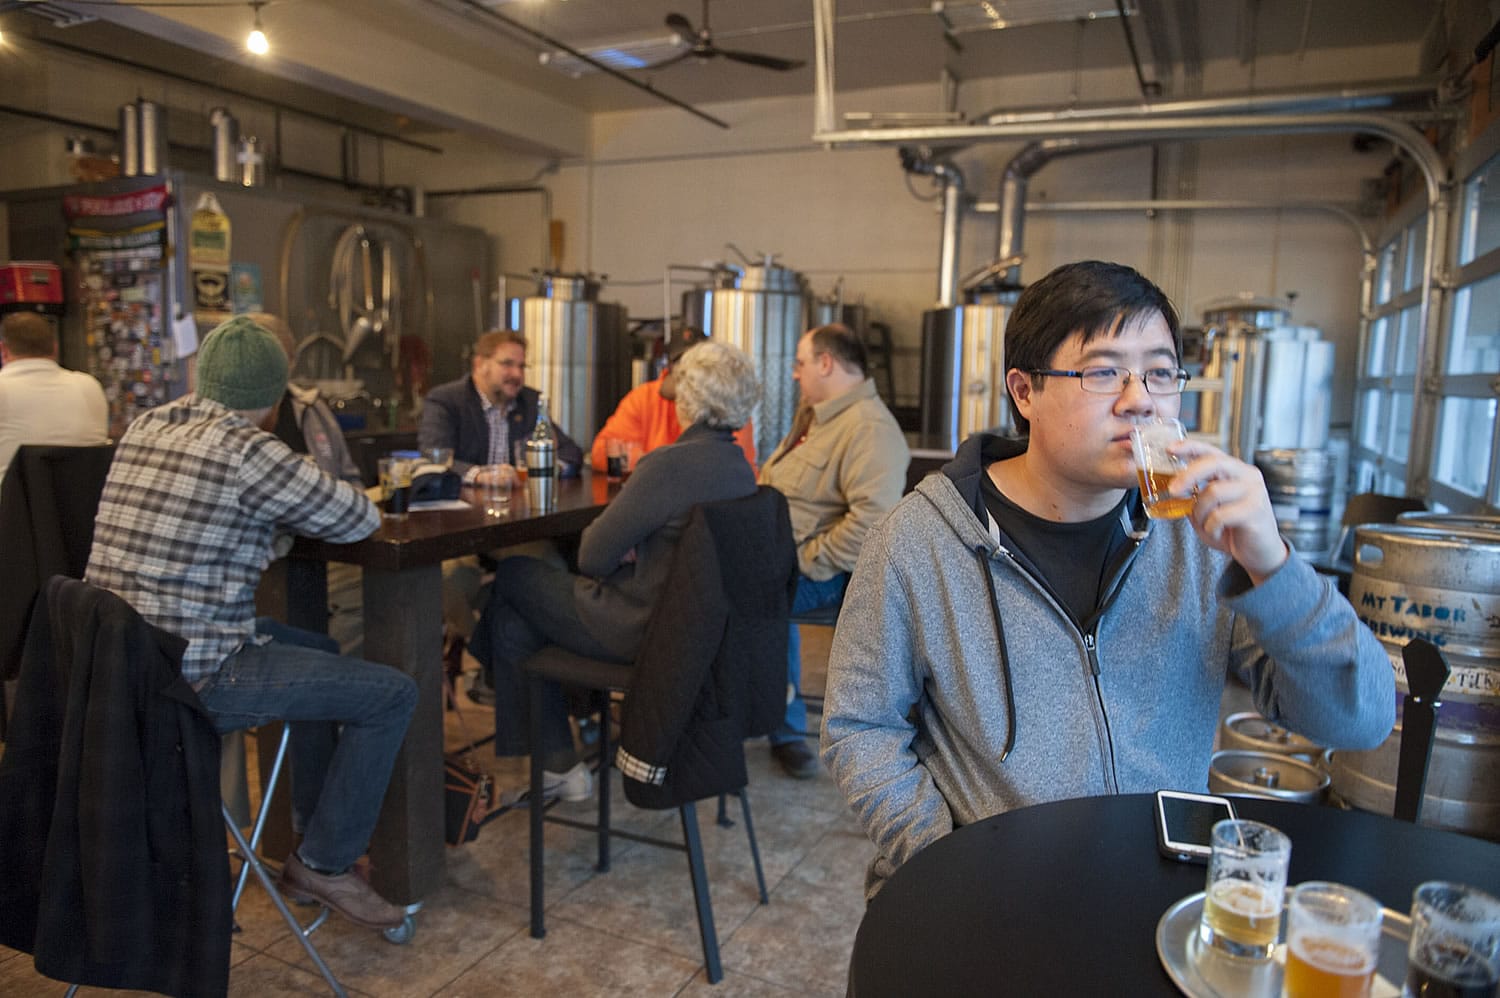 Kevin Fujii of Davis, Calif., enjoys beer with the Friday evening crowd at Mt. Tabor Brewing&#039;s taproom at 113 W. Ninth St. in Vancouver.  With Mt. Tabor&#039;s construction of a new restaurant in Felida and a production facility in Portland, the downtown taproom and brewery will close in June.